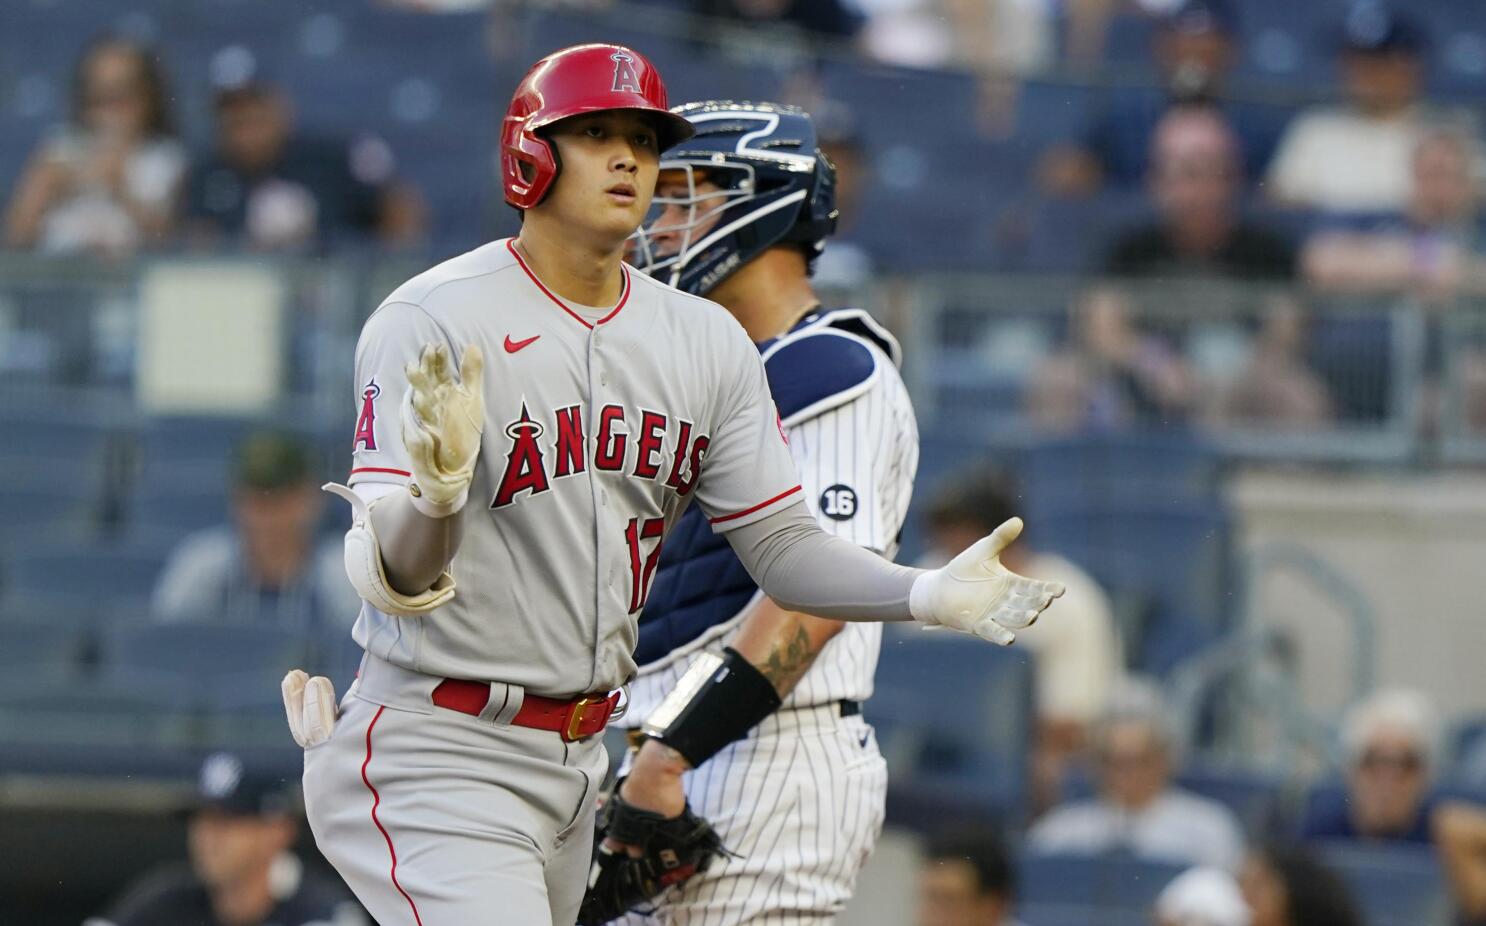 Codify on X: Mike Trout and Shohei Ohtani both went 0-for-3 with